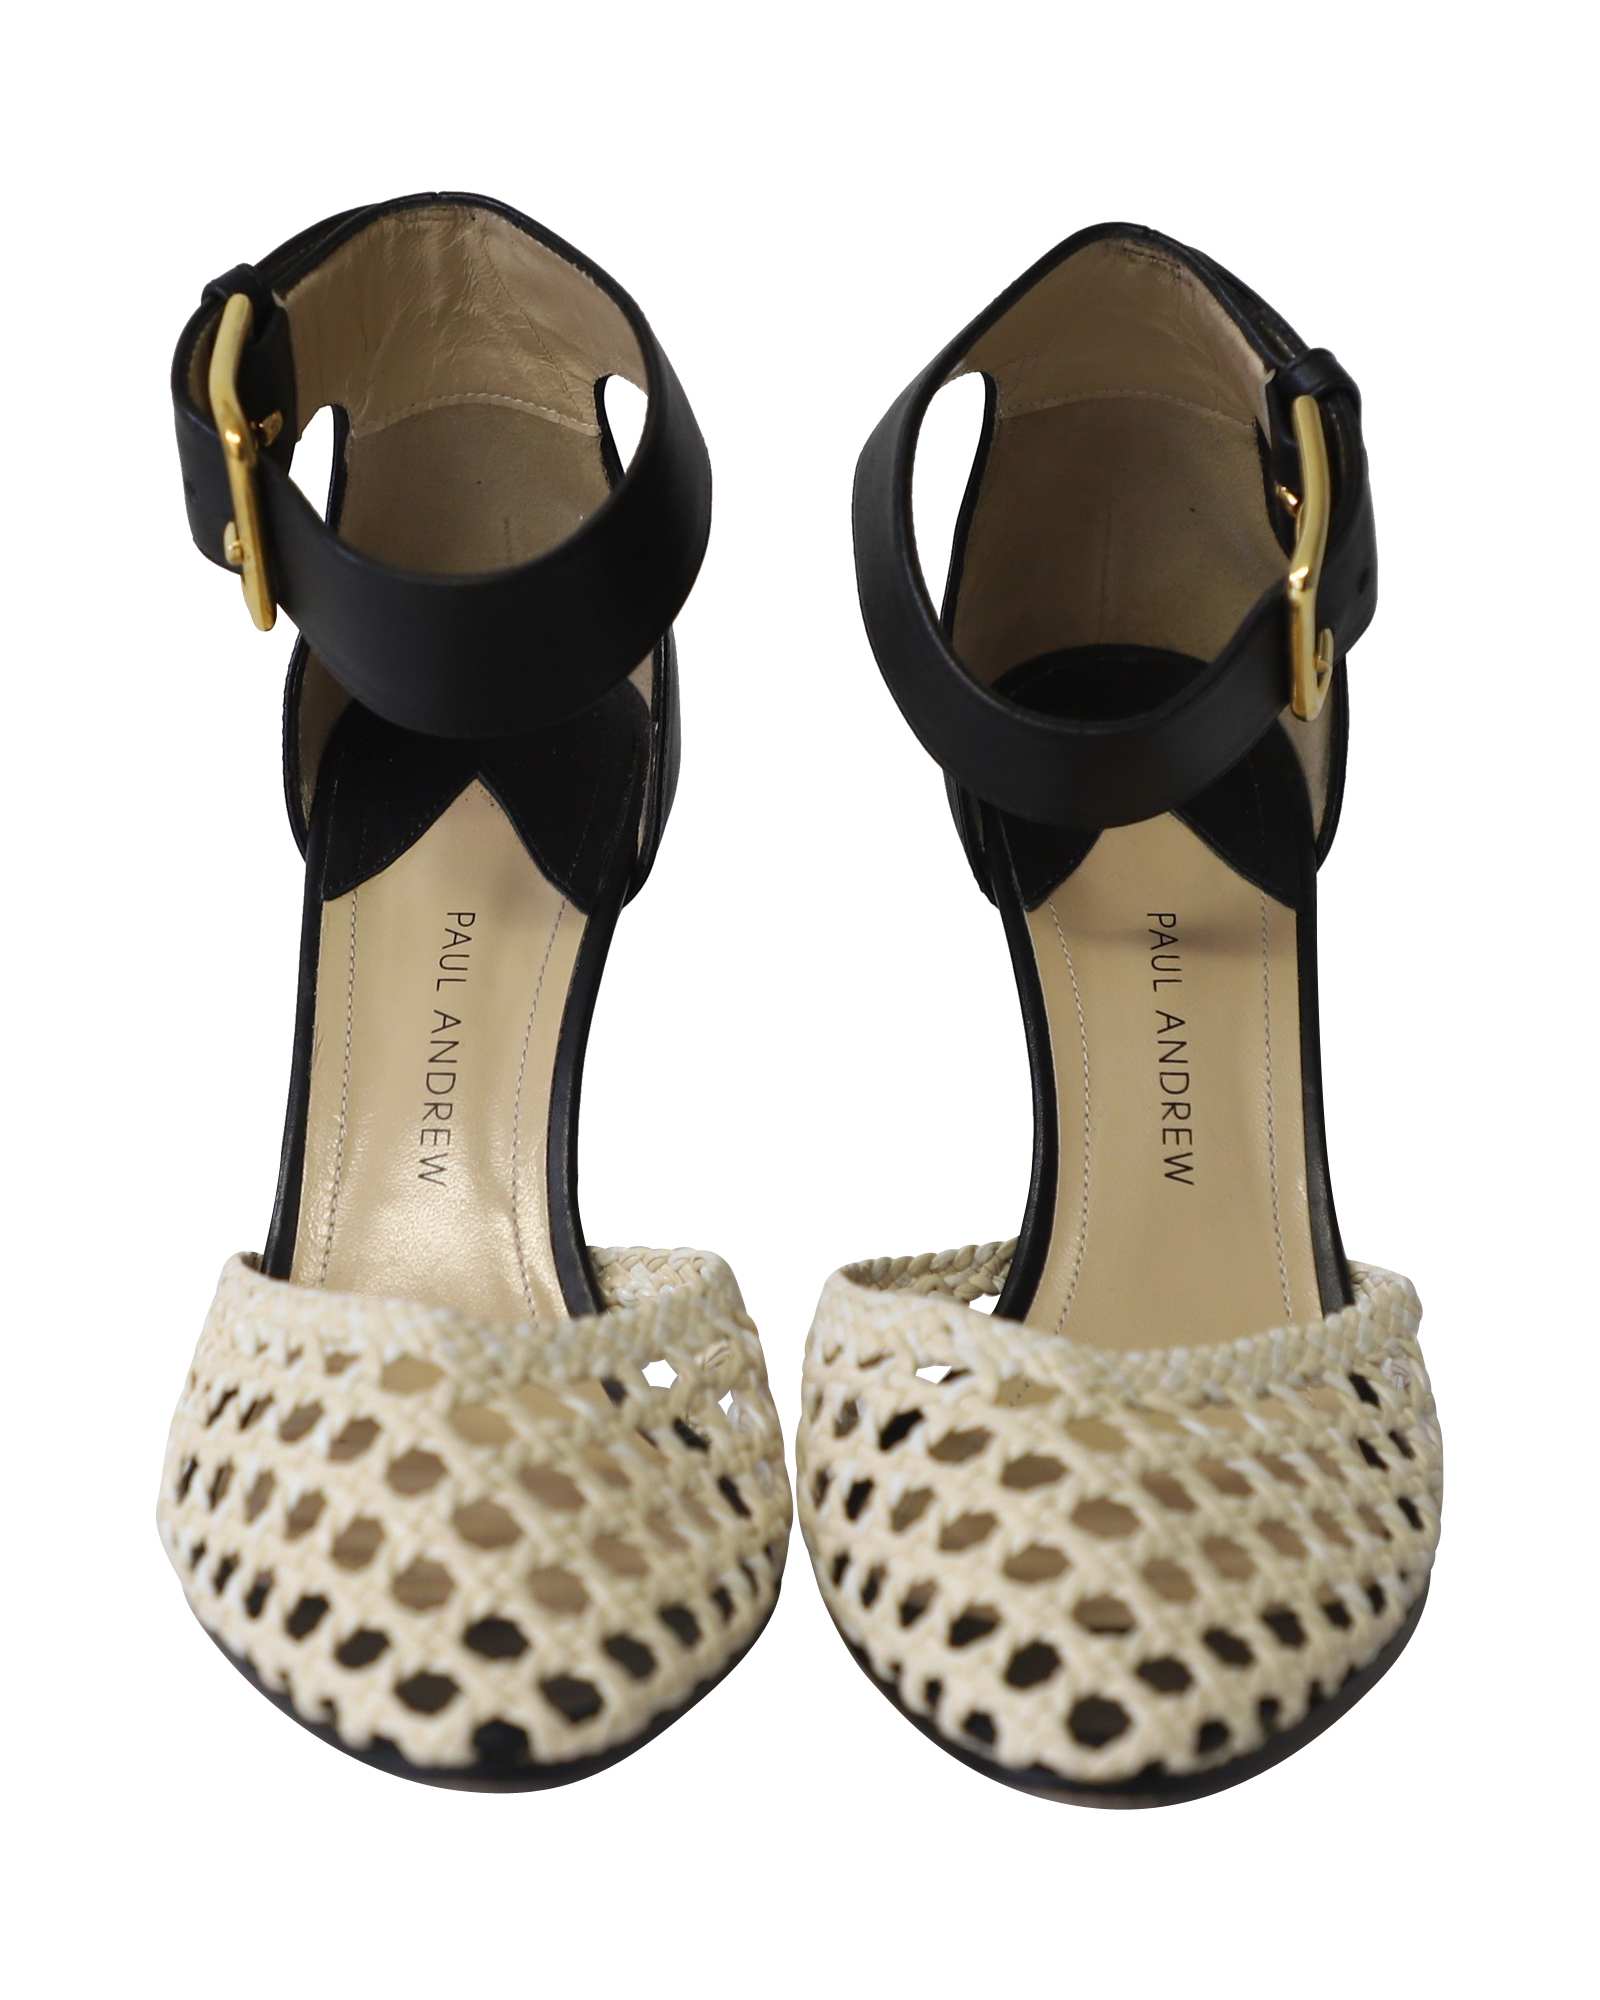 Cane Weave Heeled Sandals in Dark Chocolate and Cream Leather